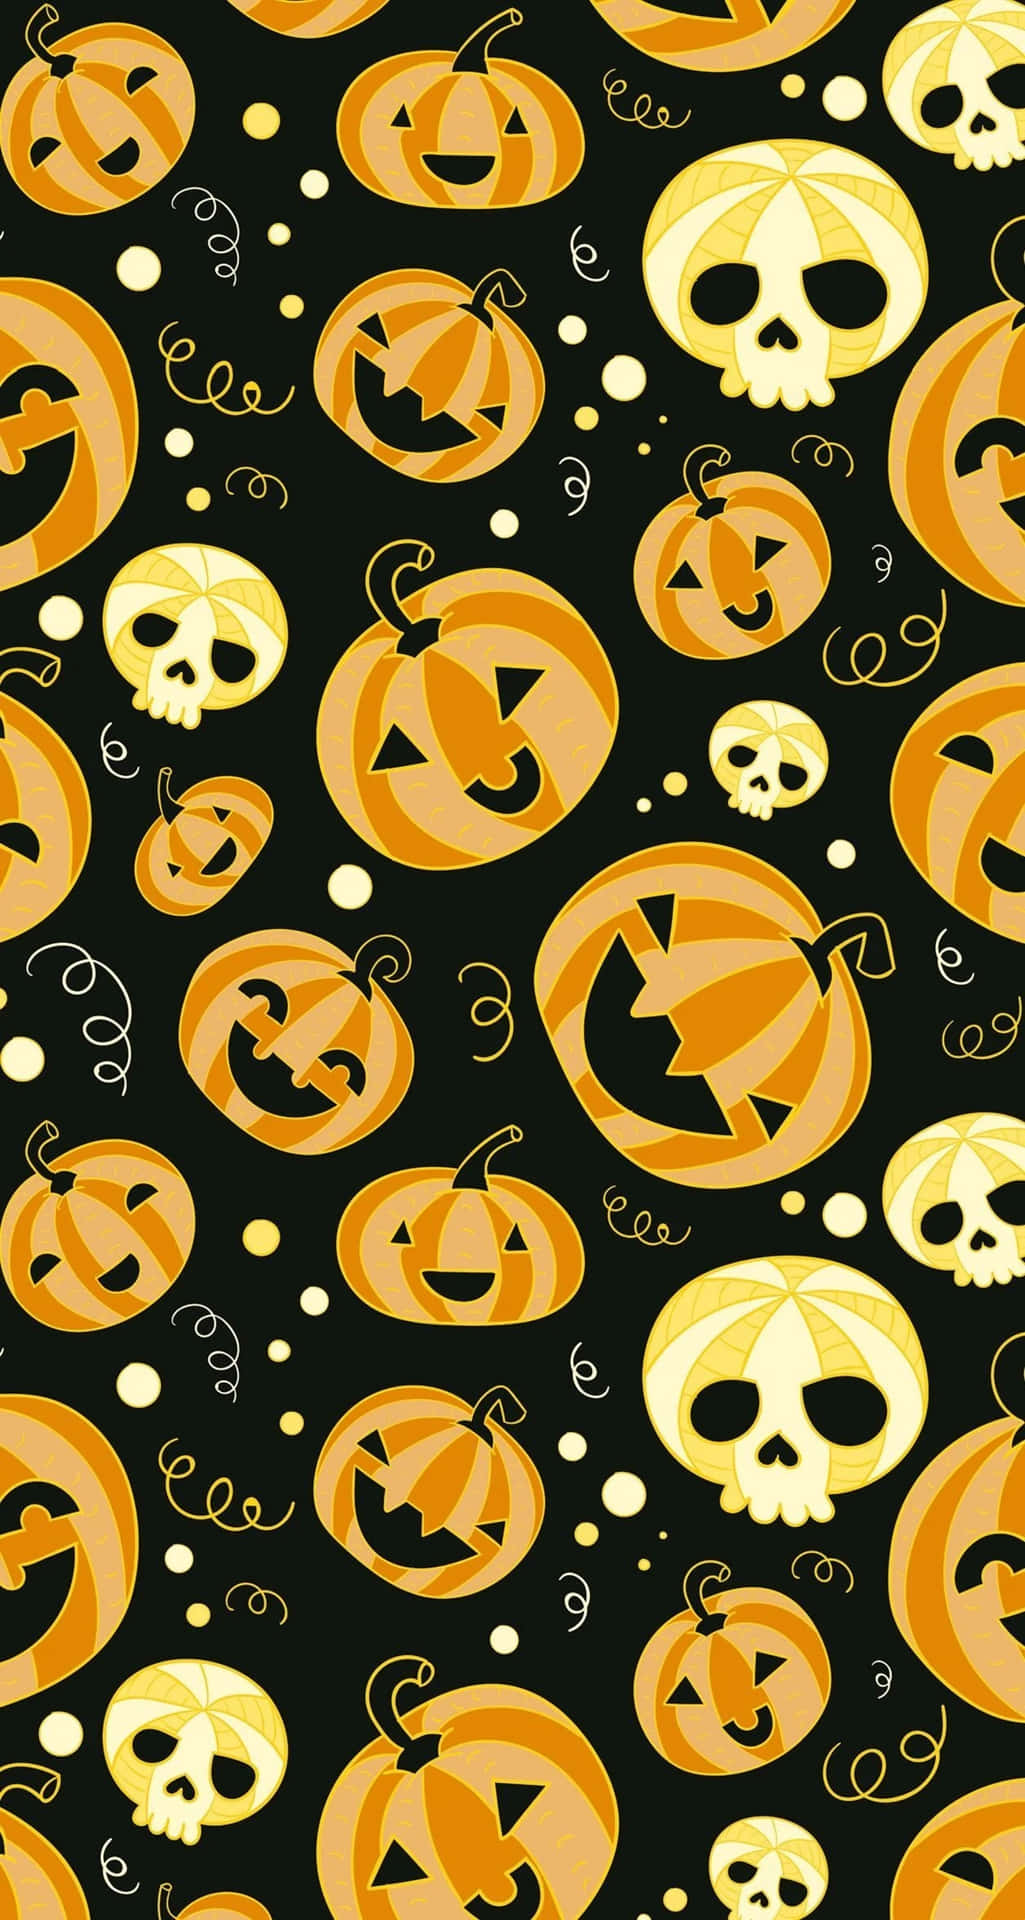 Celebrate Halloween with a Unique Phone Background!